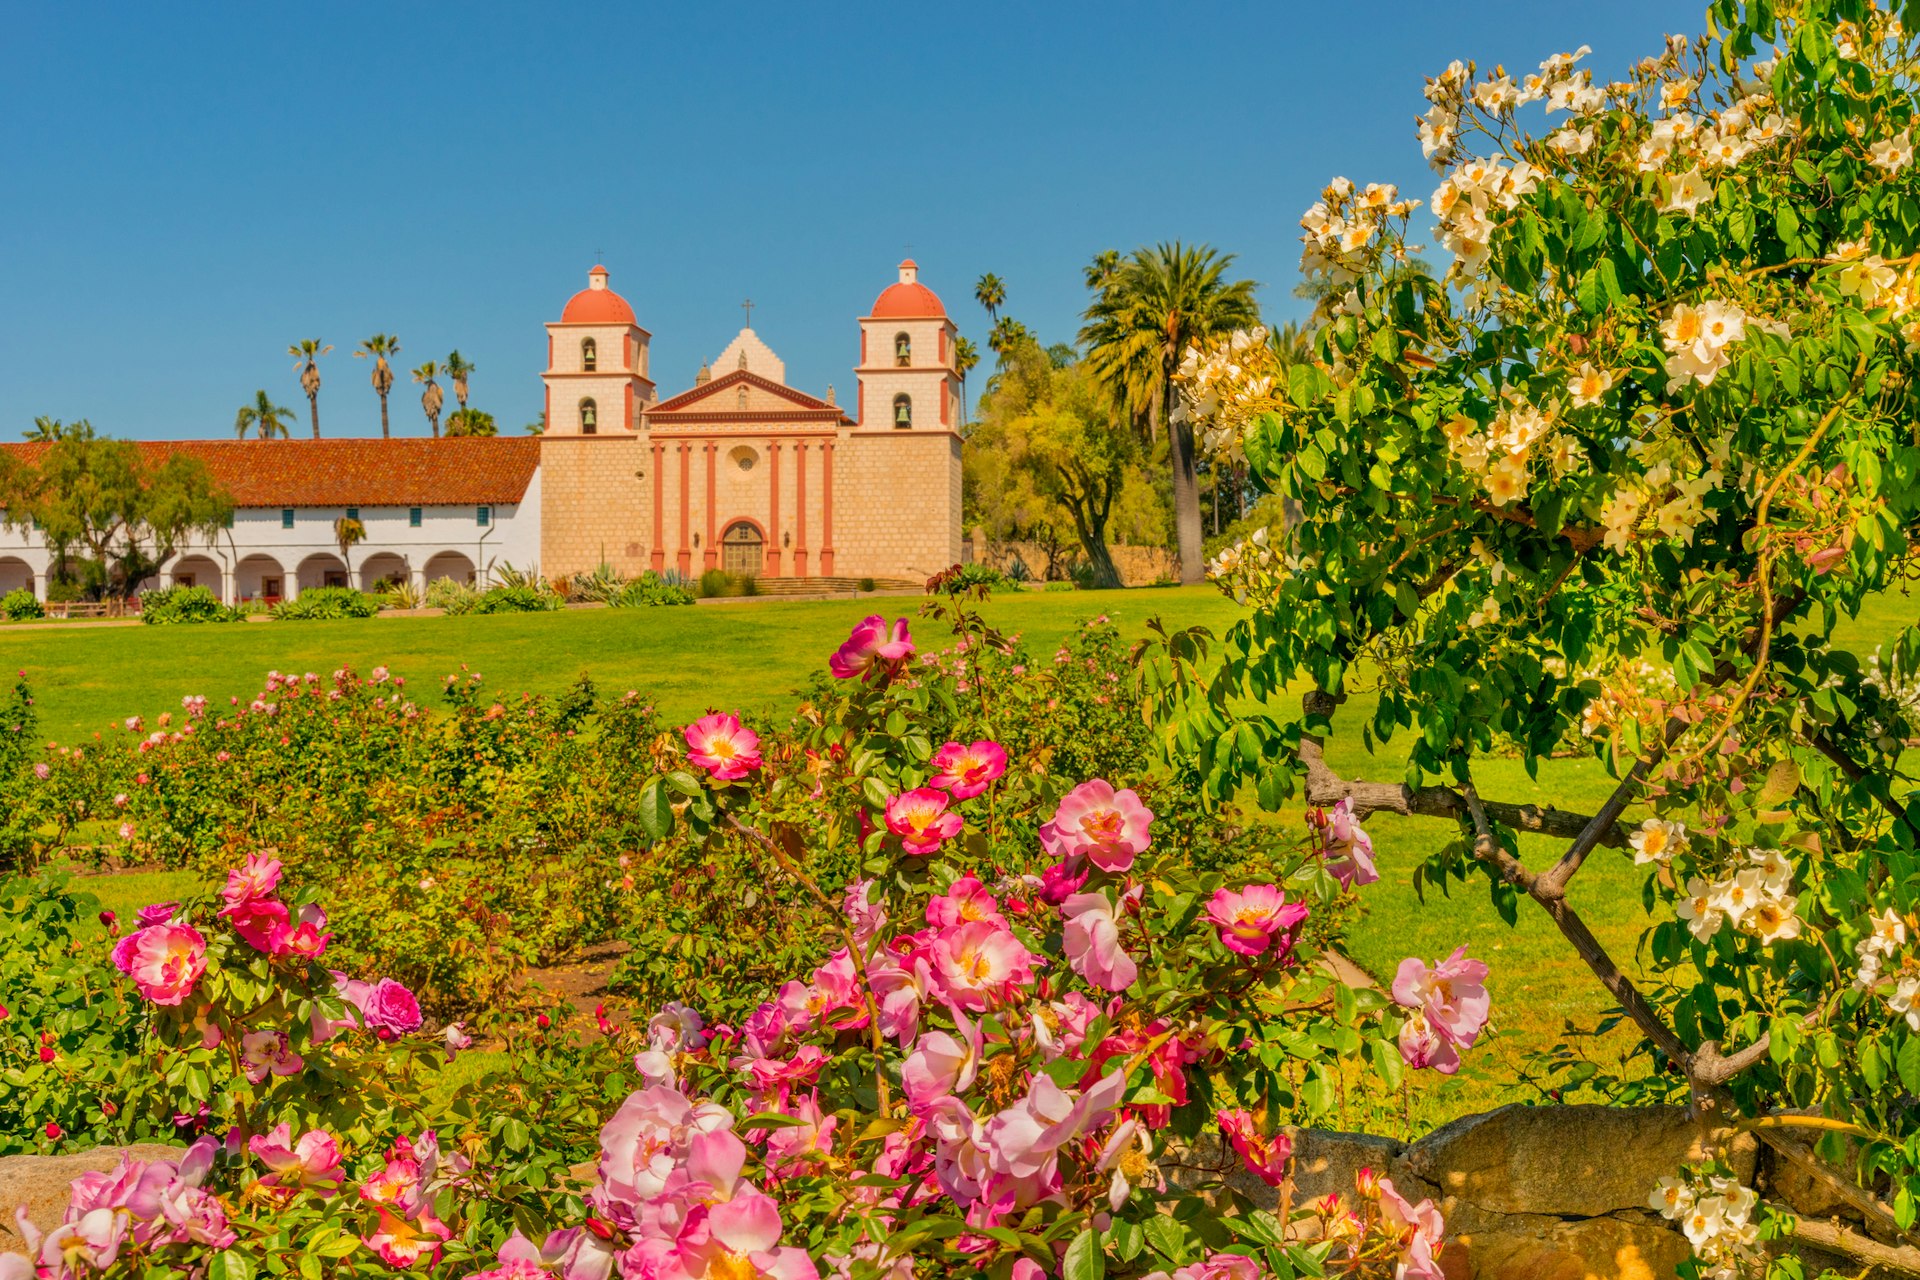 Flowers in bloom in pinks and yellows in the garden of a Spanish-style church building